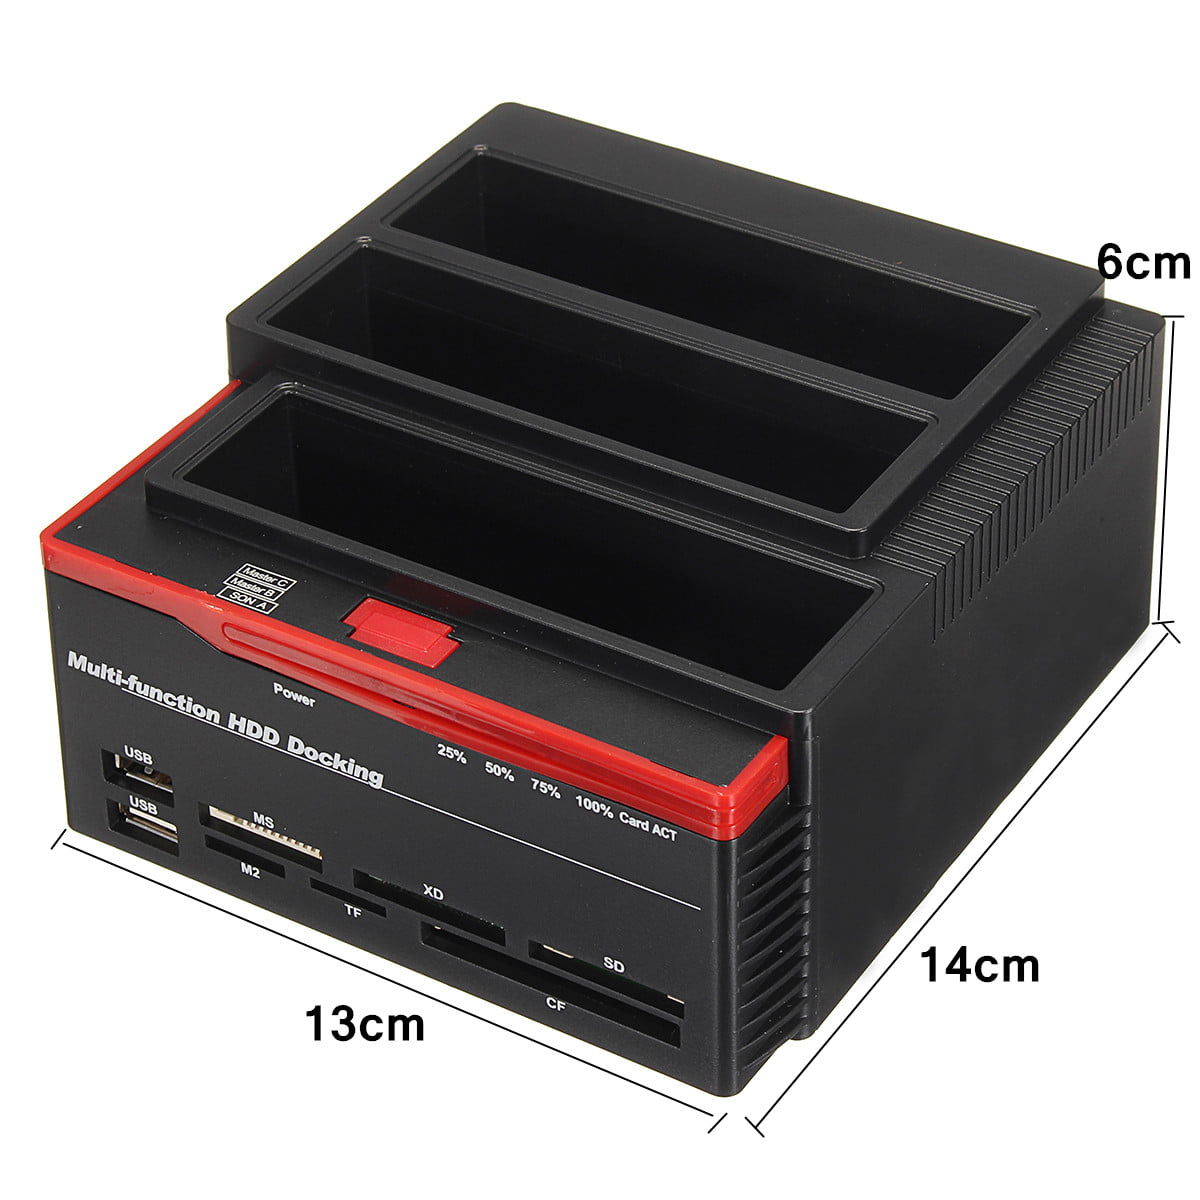 Cinolink Hard Drive Dock Docking Station USB 3.0 to SATA 2.5/3.5 Inch Hard Drive Docking Station with 3.3 Feet USB 3.0 Cable for HDD/SSD Support 8TB 